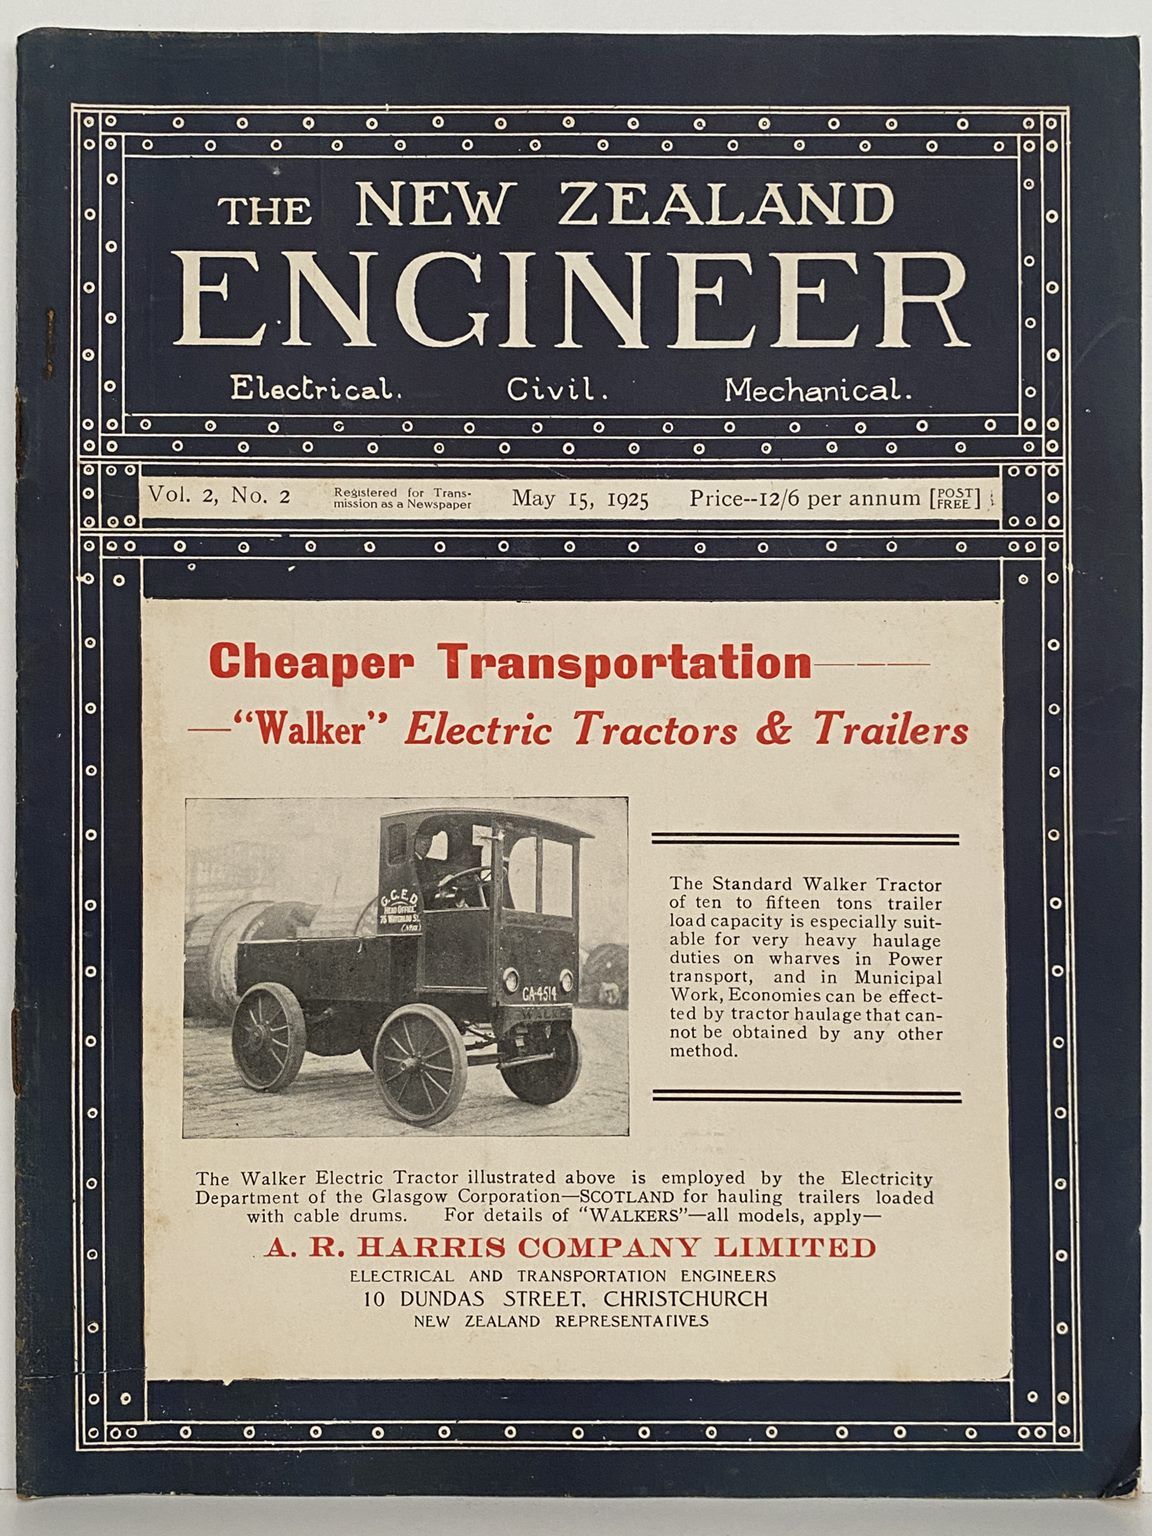 OLD MAGAZINE: The New Zealand Engineer Vol. 2, No. 2 - 15 May 1925